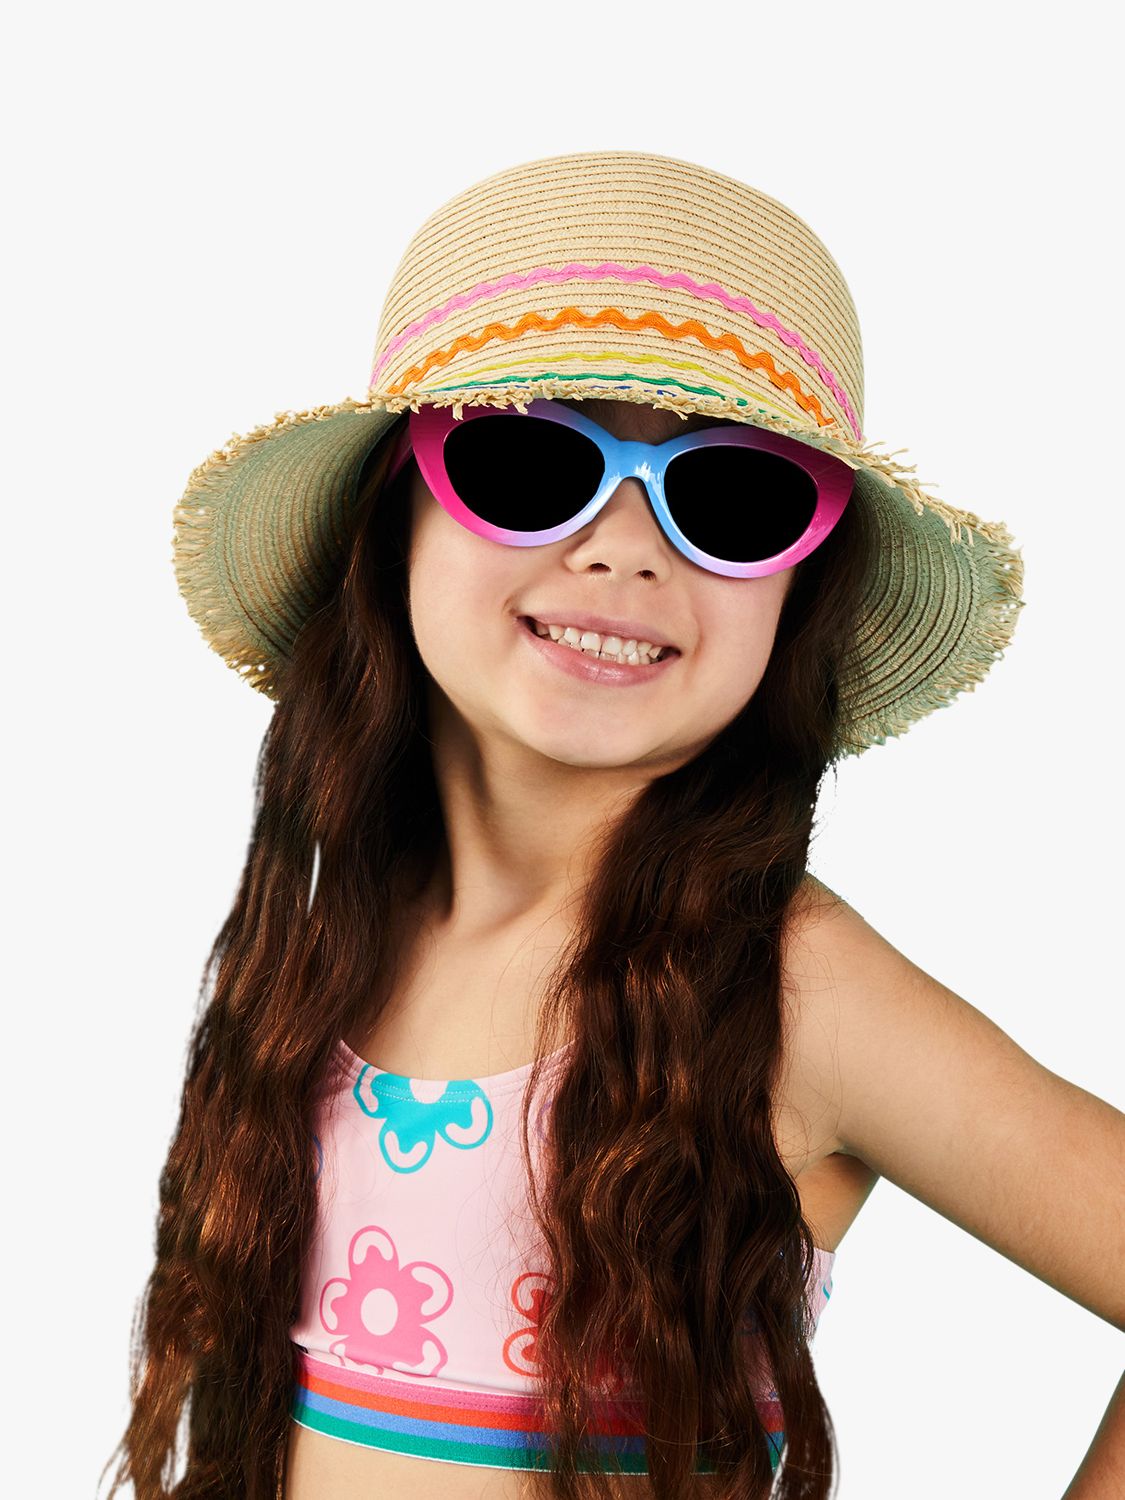 Angels by Accessorize Kids' Ric Rac Sun Hat, Natural, One Size